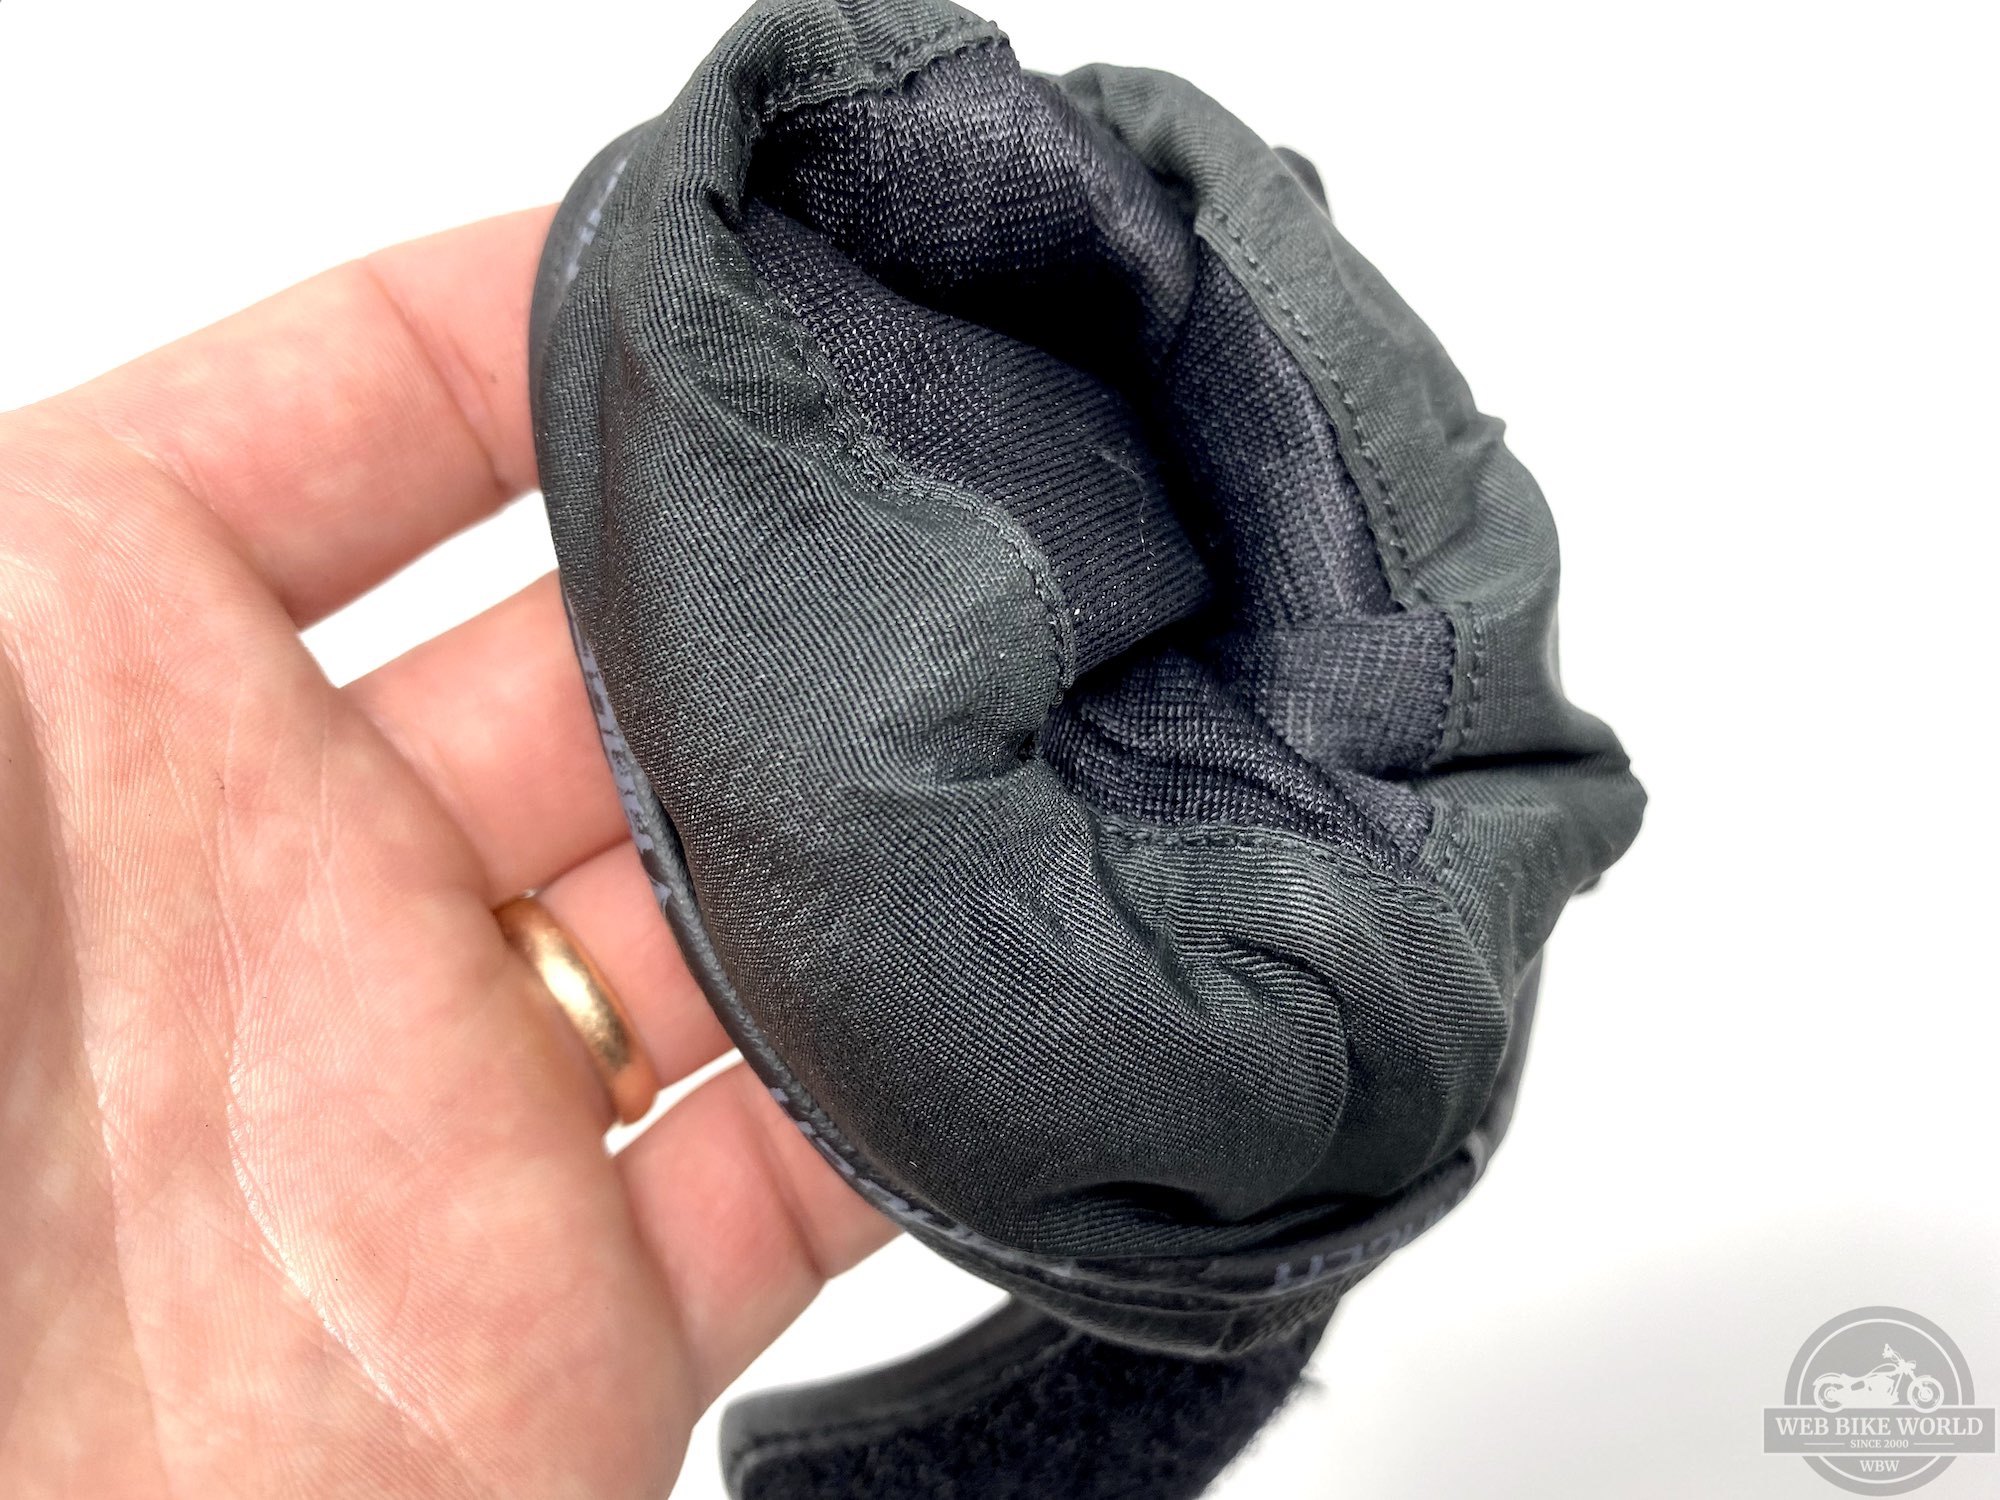 Closeup of the waterproof membrane on the MultiTop Short gloves